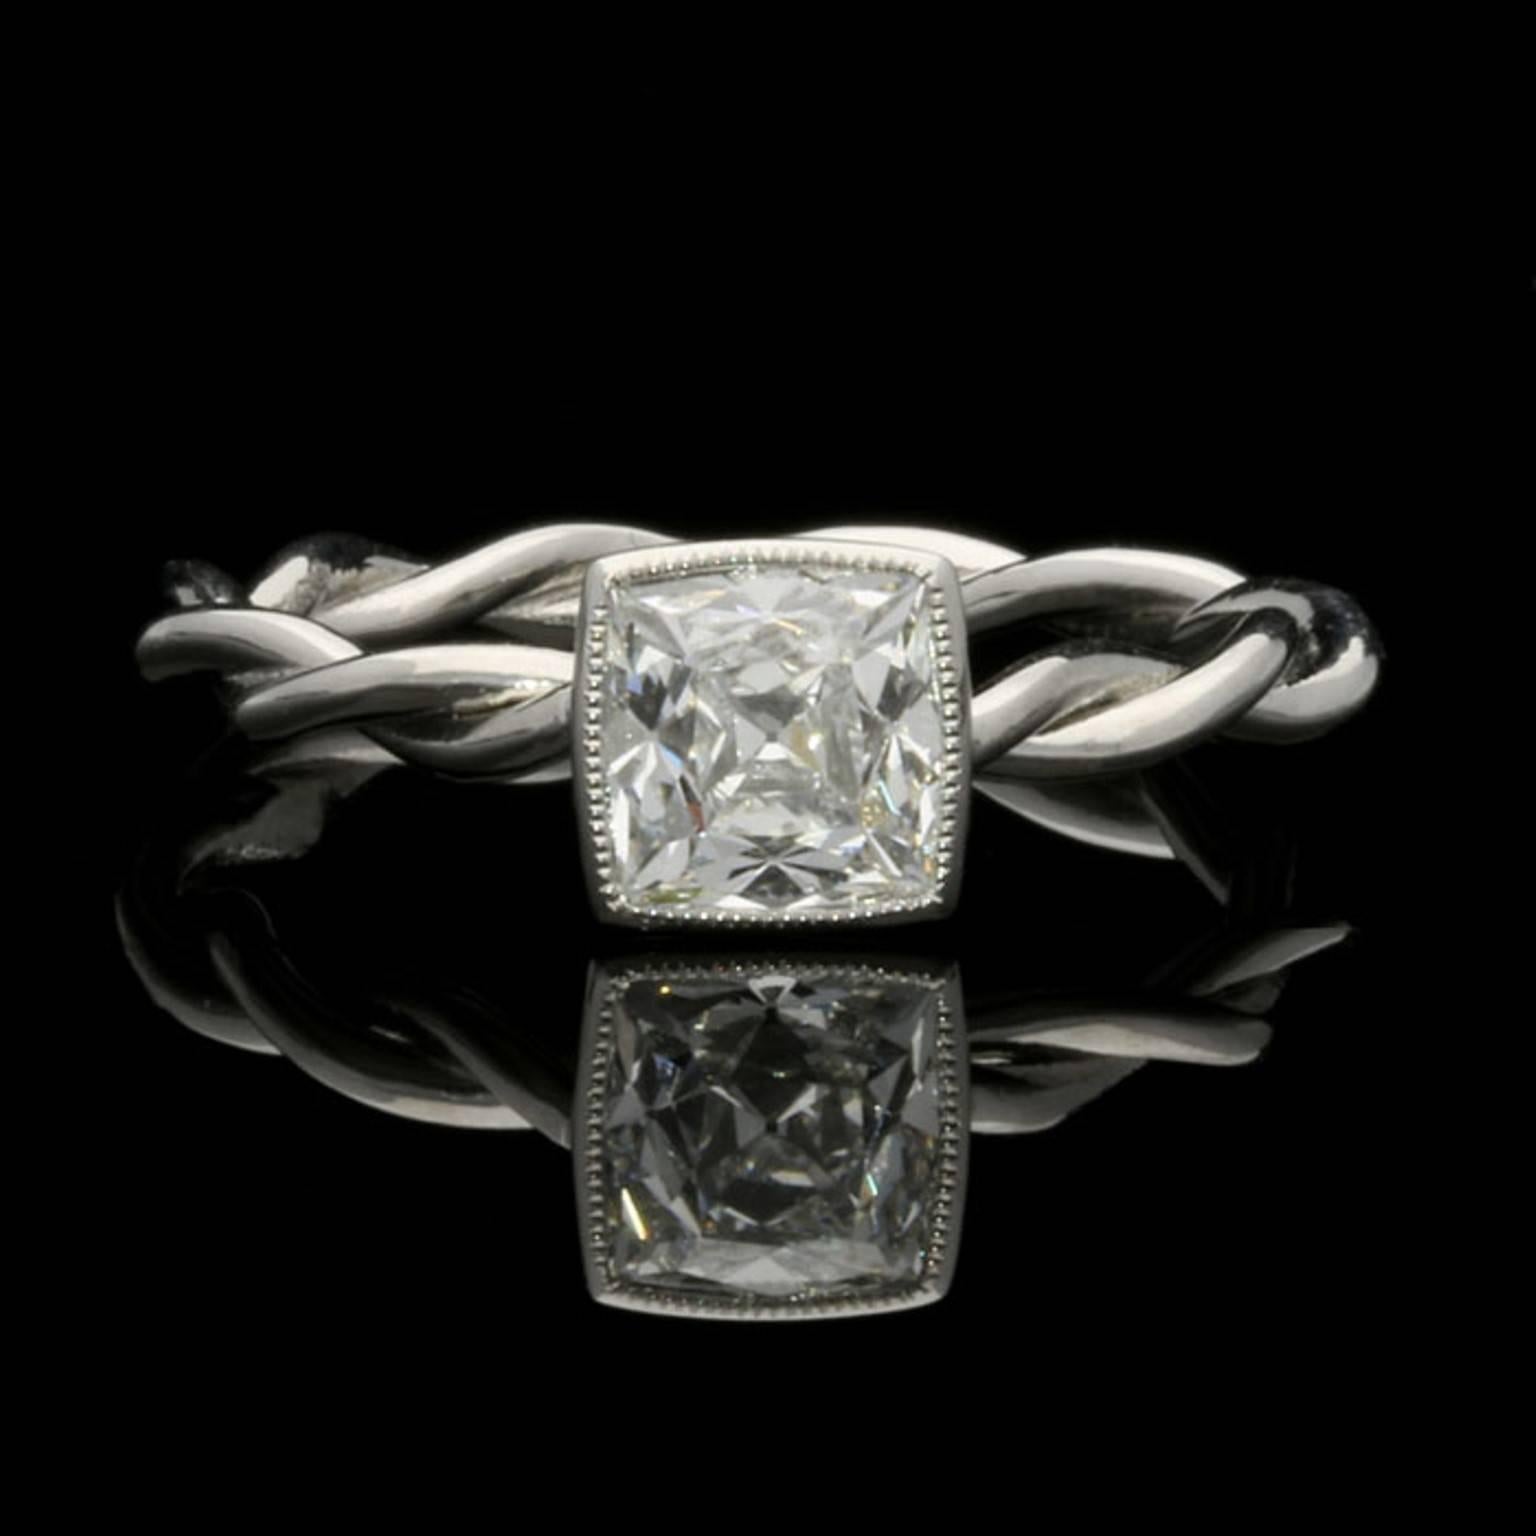 1.09ct F VVS2 Peruzzi brilliant cut diamond with GIA certificate
Platinum with London assay marks.
UK finger size M, US size 6.5, can be adjusted to your own finger size
3.5 grams

A striking 1.09ct Peruzzi cut diamond and platinum ring by Hancocks,